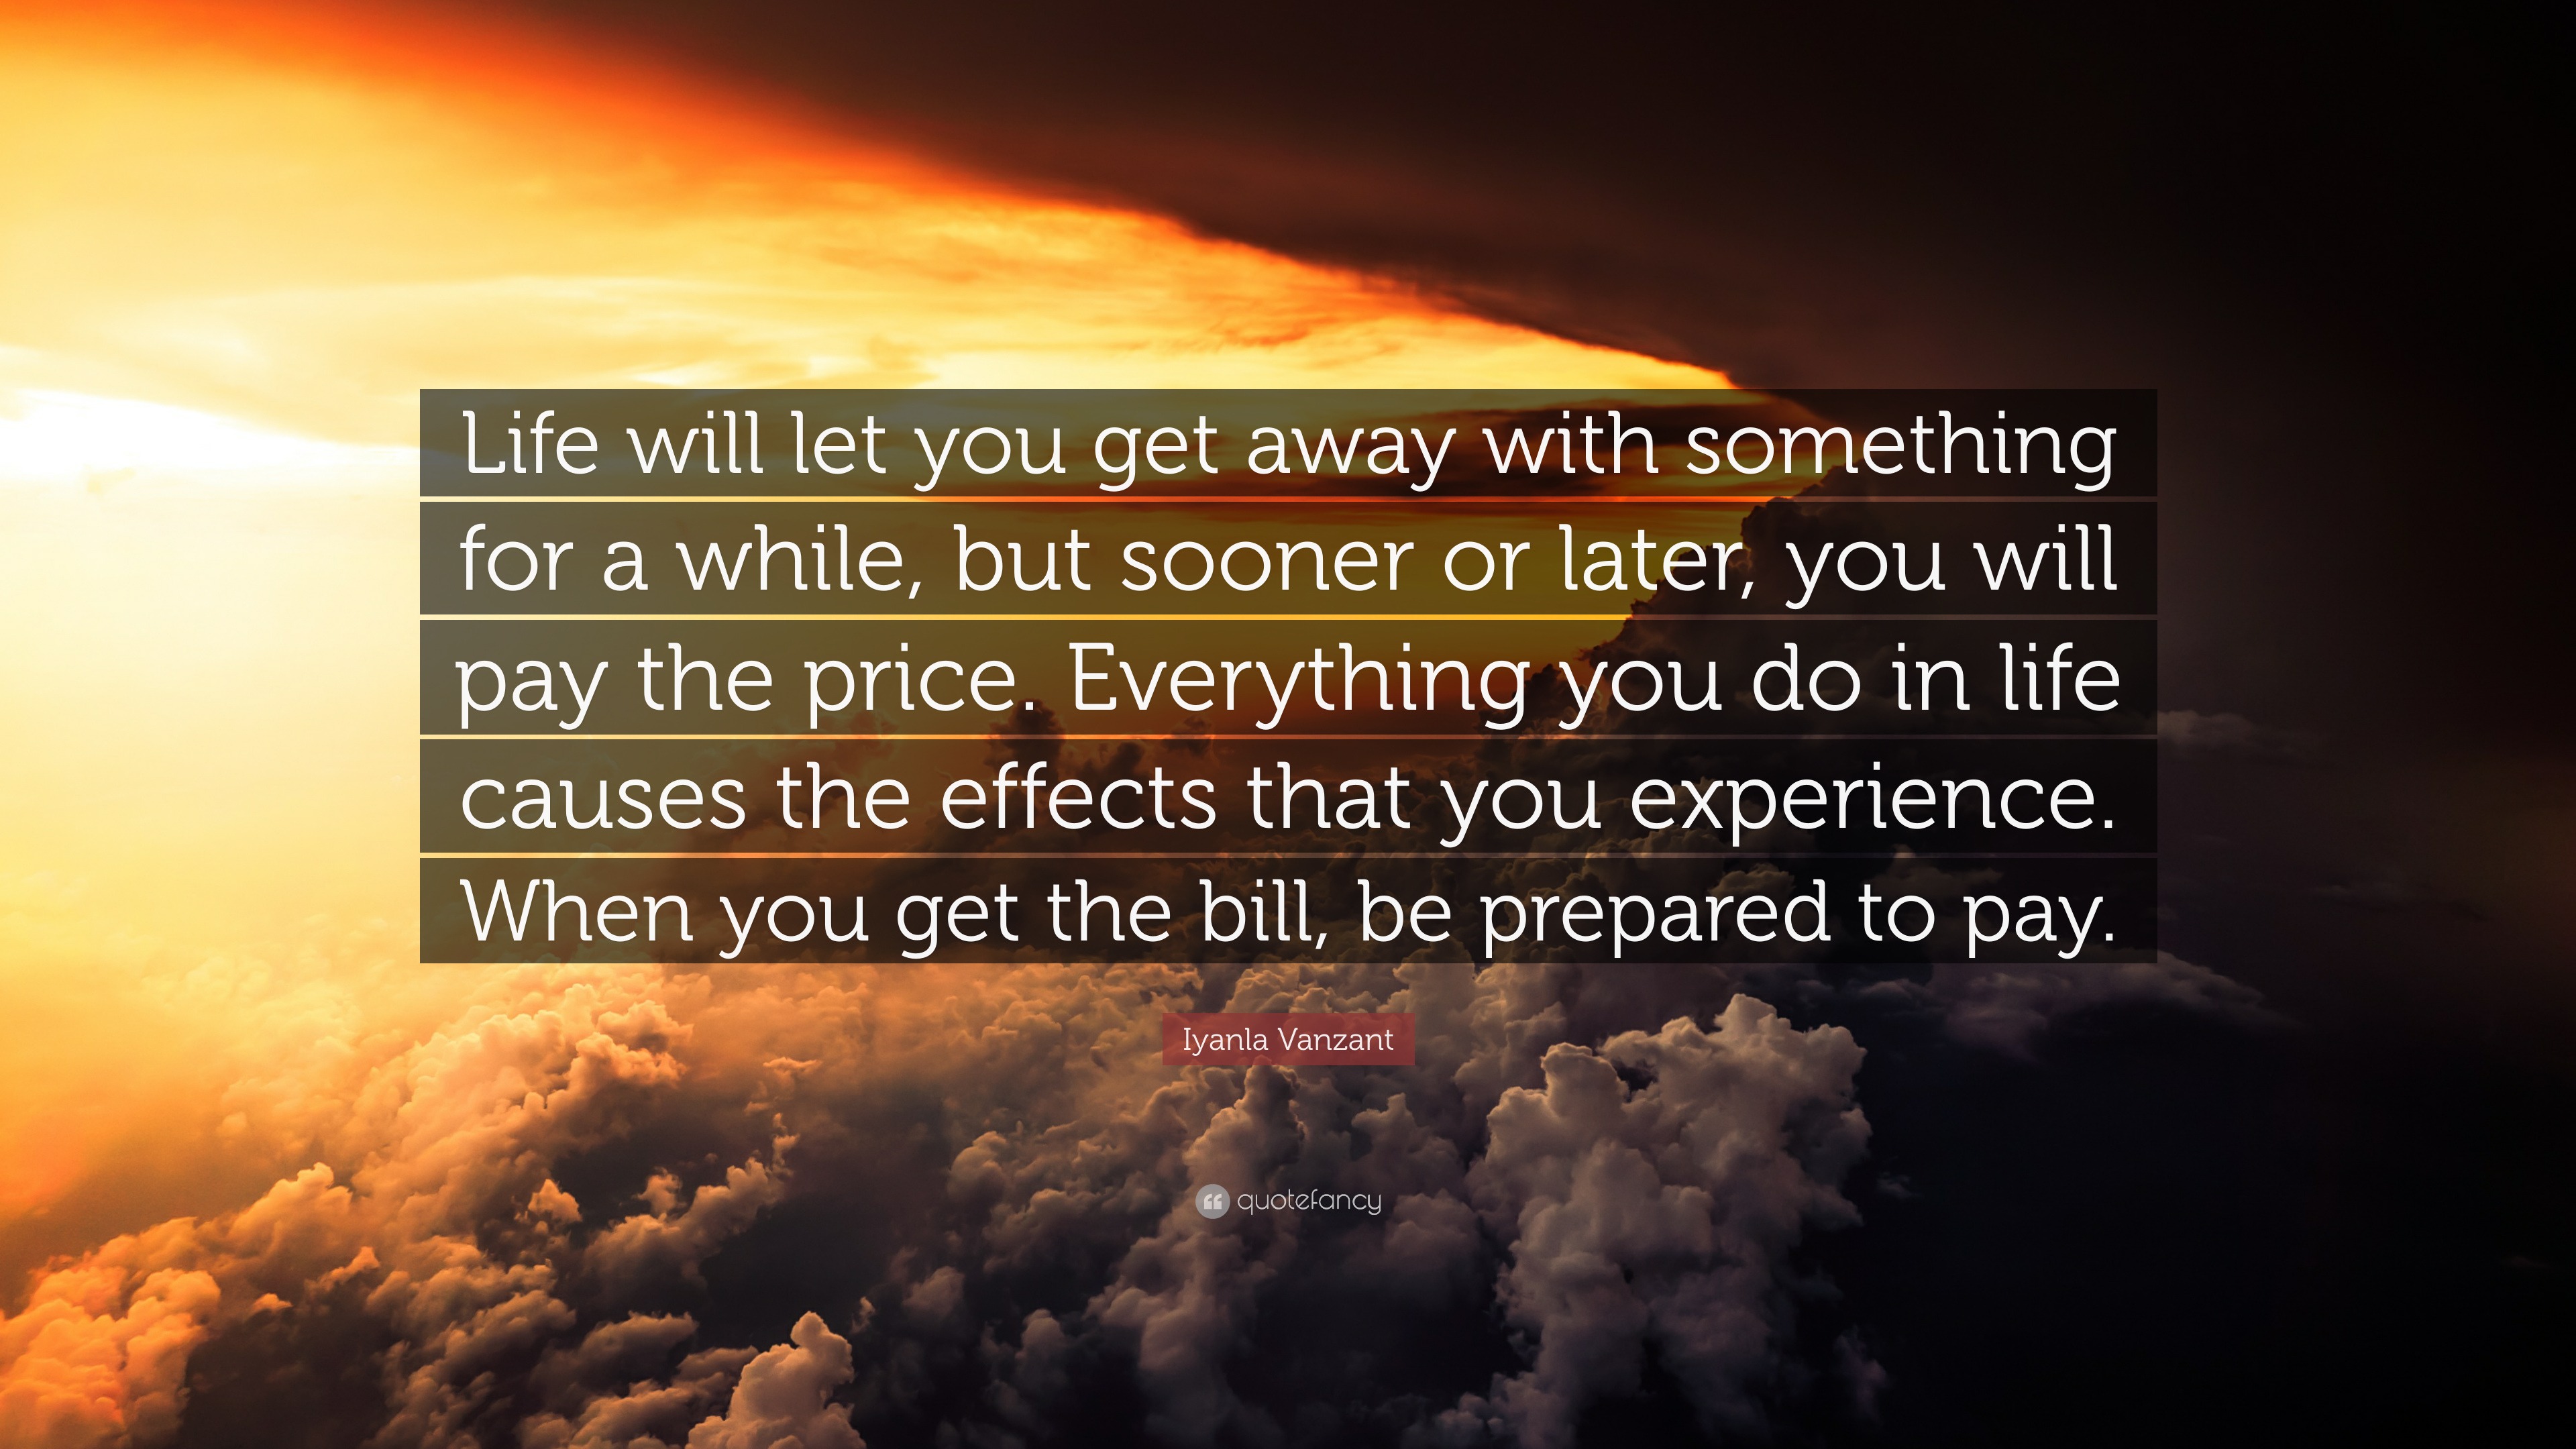 4735147 Iyanla Vanzant Quote Life will let you get away with something for